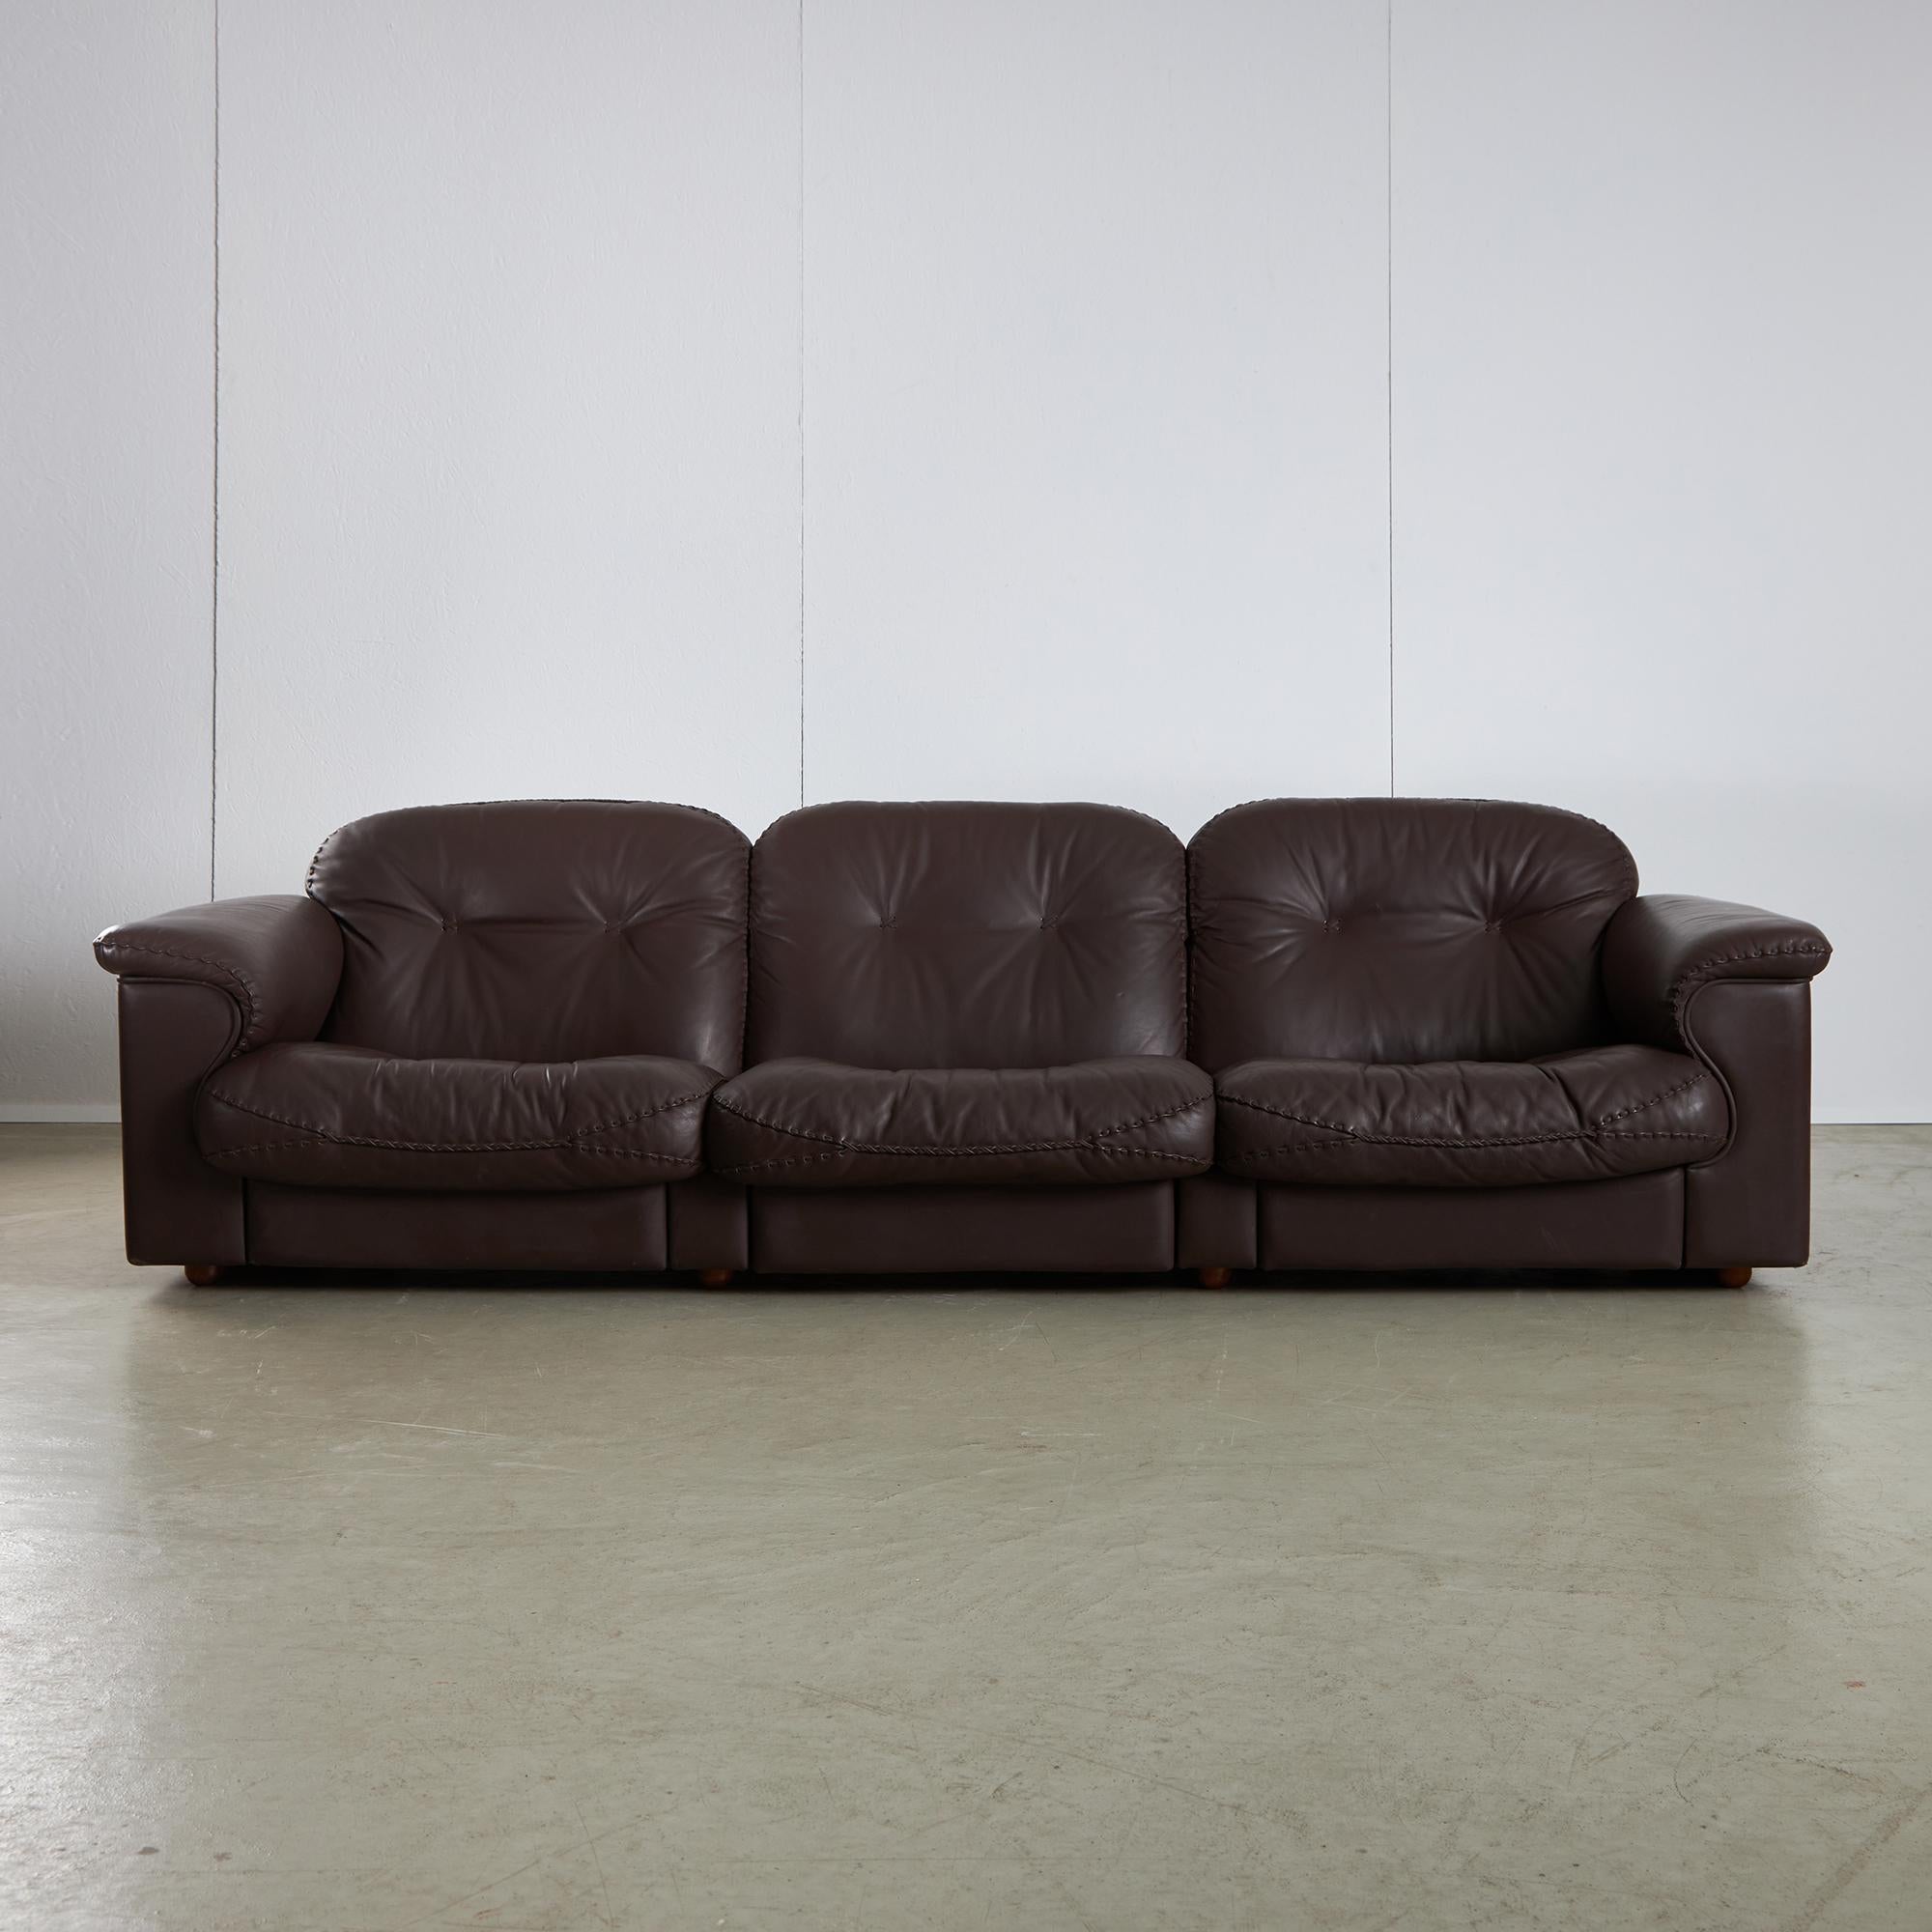 Three-seater brown leather DS101 3 sofa designed for De Sede, with hand-stitched seams and extendable individual seats for lounge sitting. Under the cushions you can find Zani Italia upholstery showing small tears and marks. 